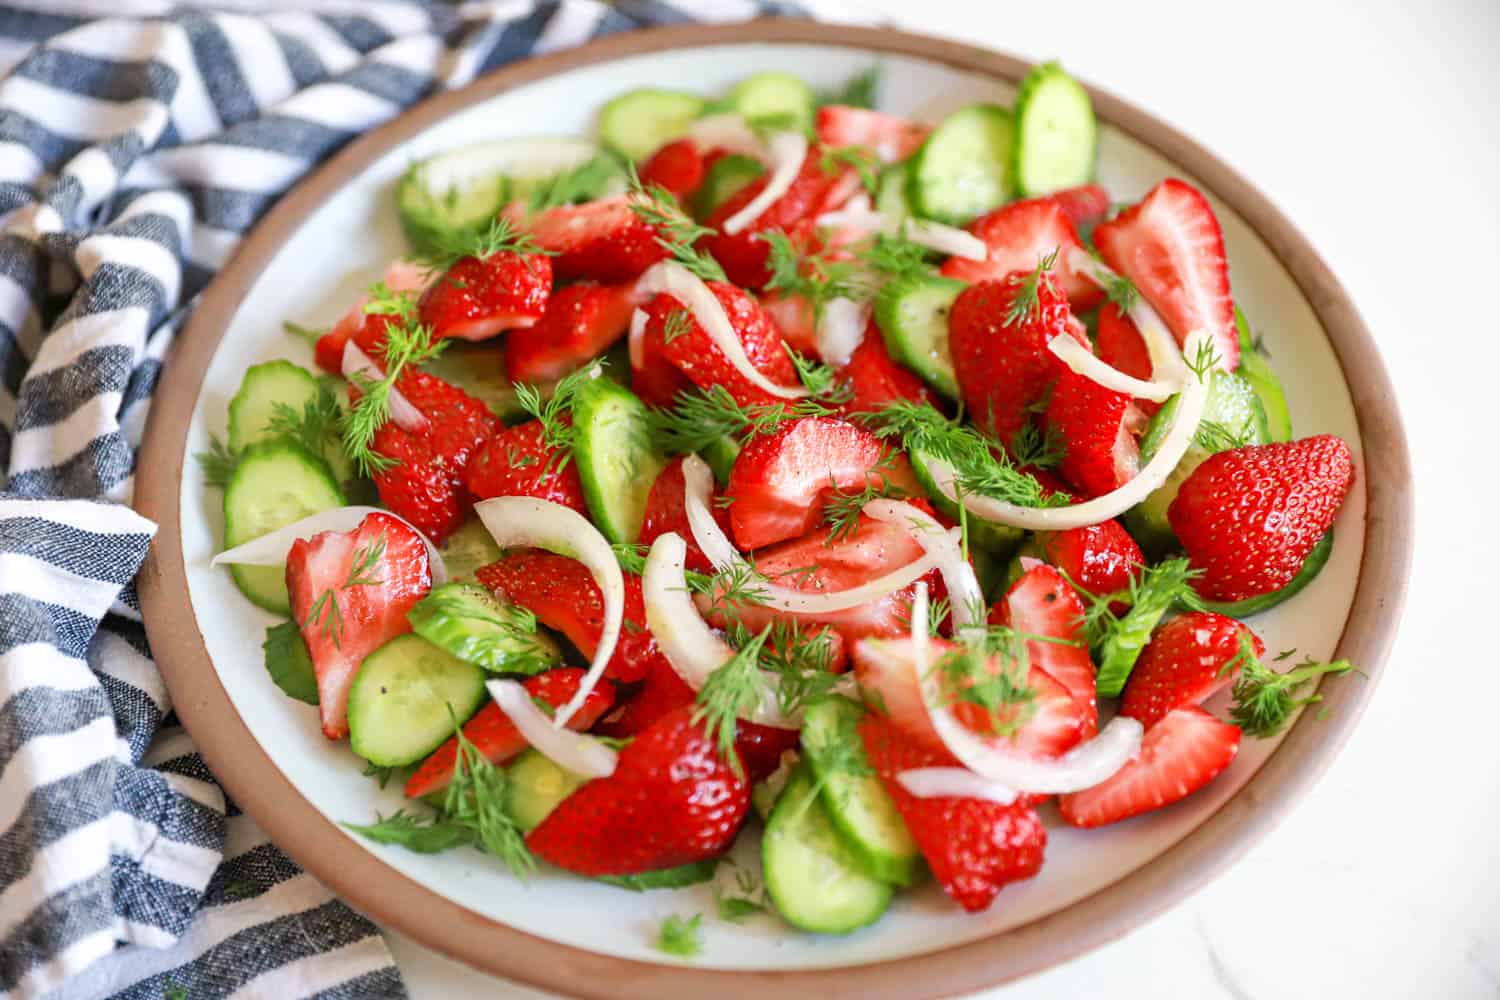 Ceramic plate of cucumber and strawberry salad.